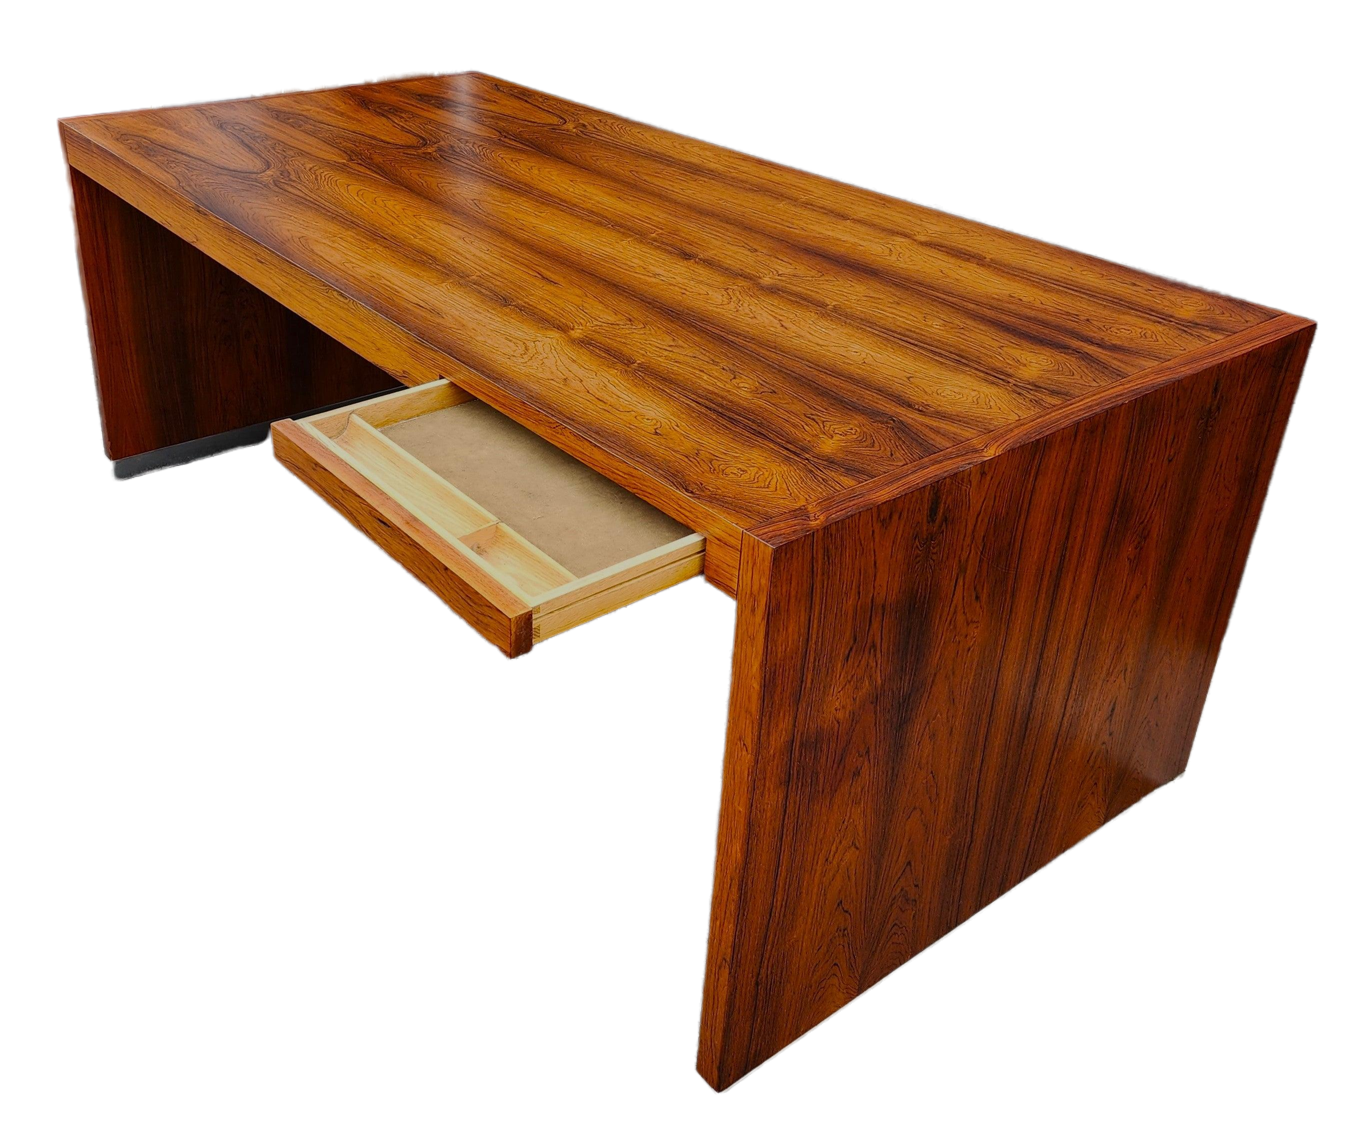 REFINISHED Mid Century Modern Free-Standing Rosewood Desk by J. Geiger